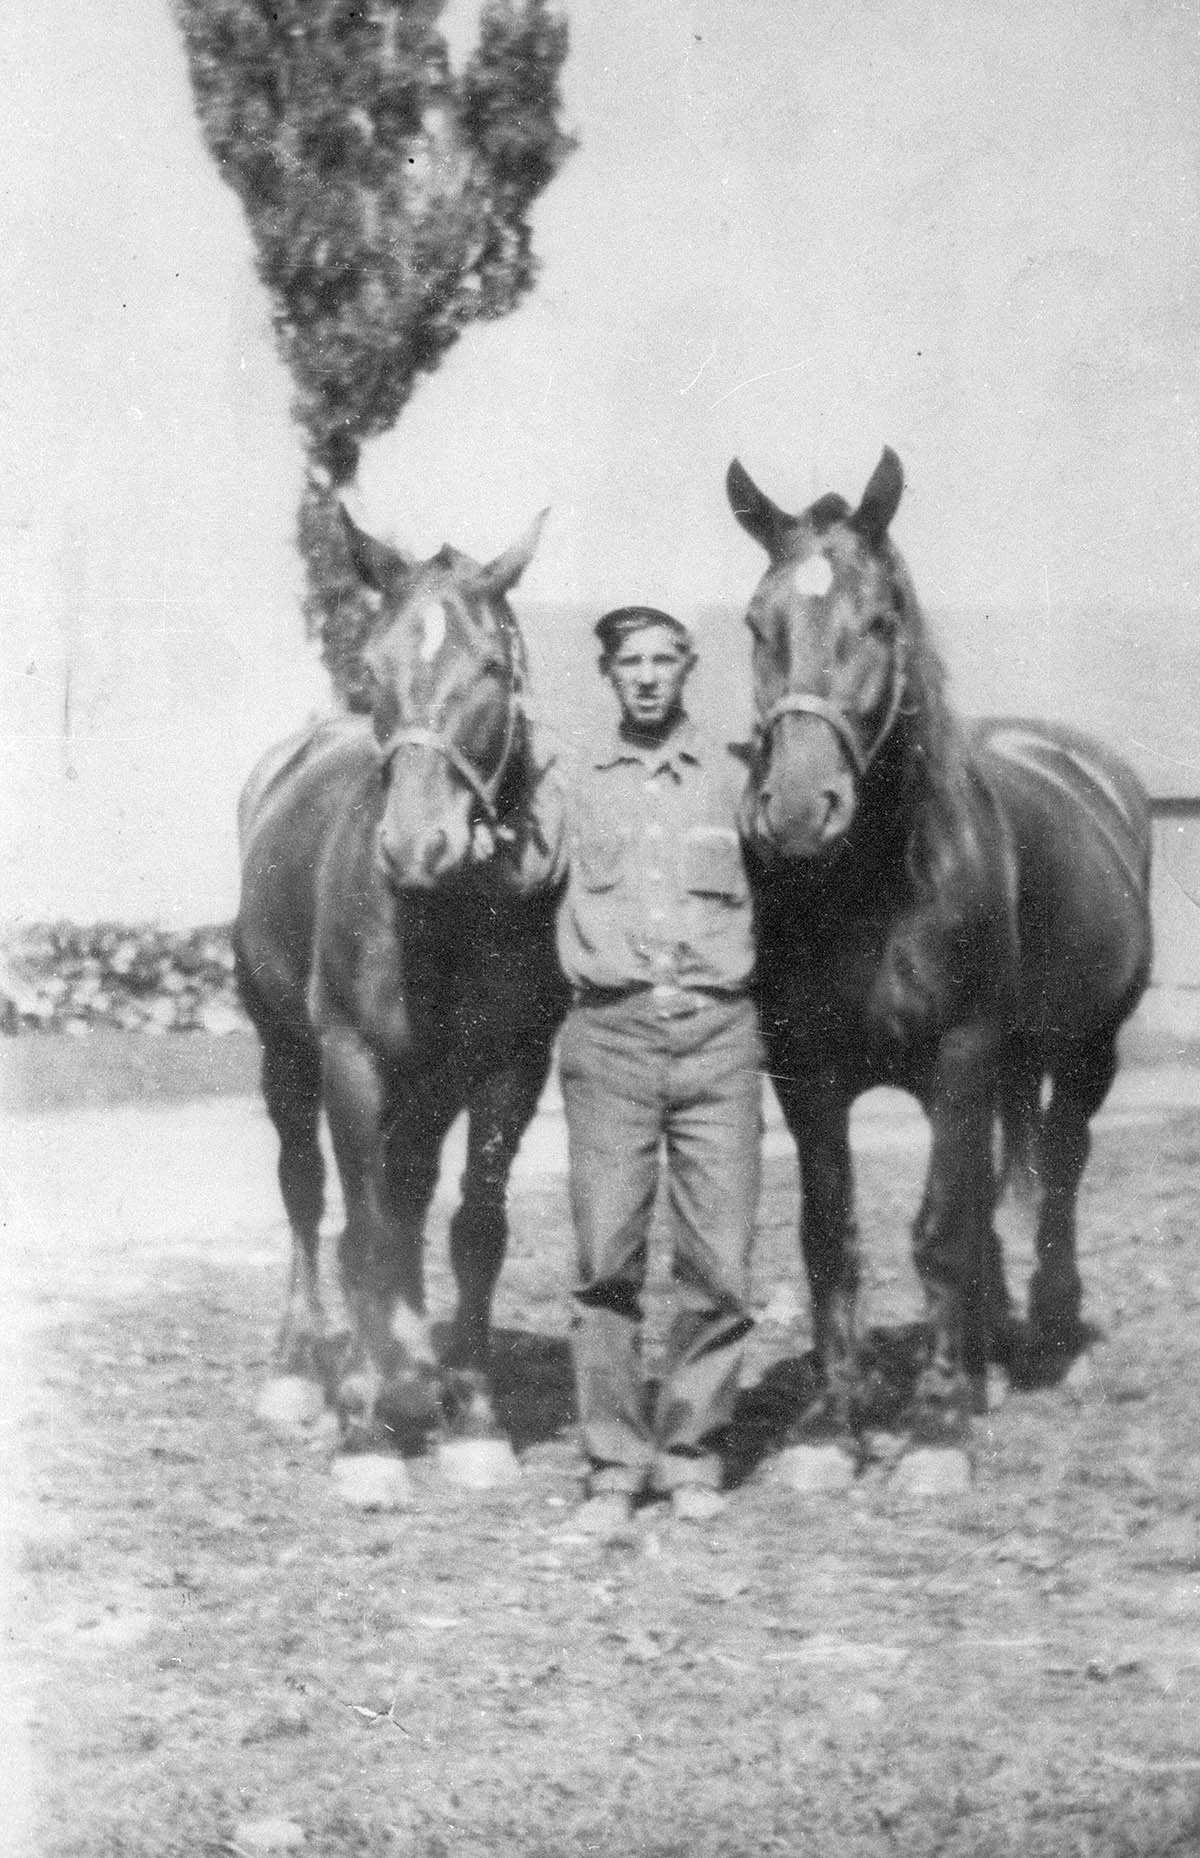 Roland Peil standing with two horses